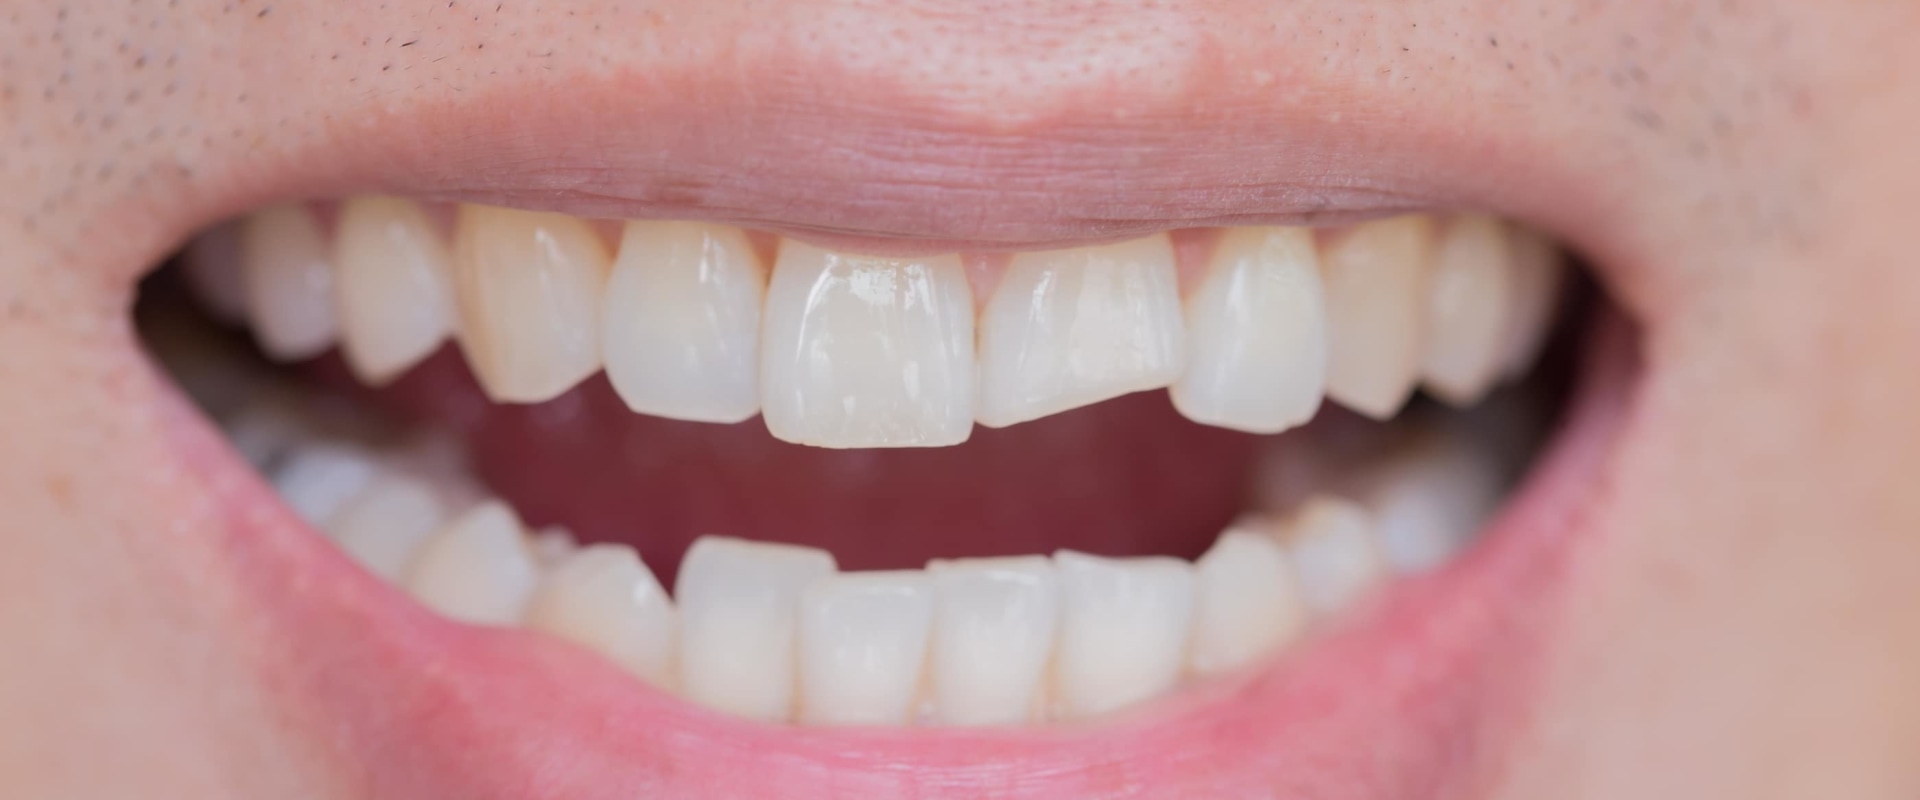 Is it Worth Repairing a Chipped Tooth?